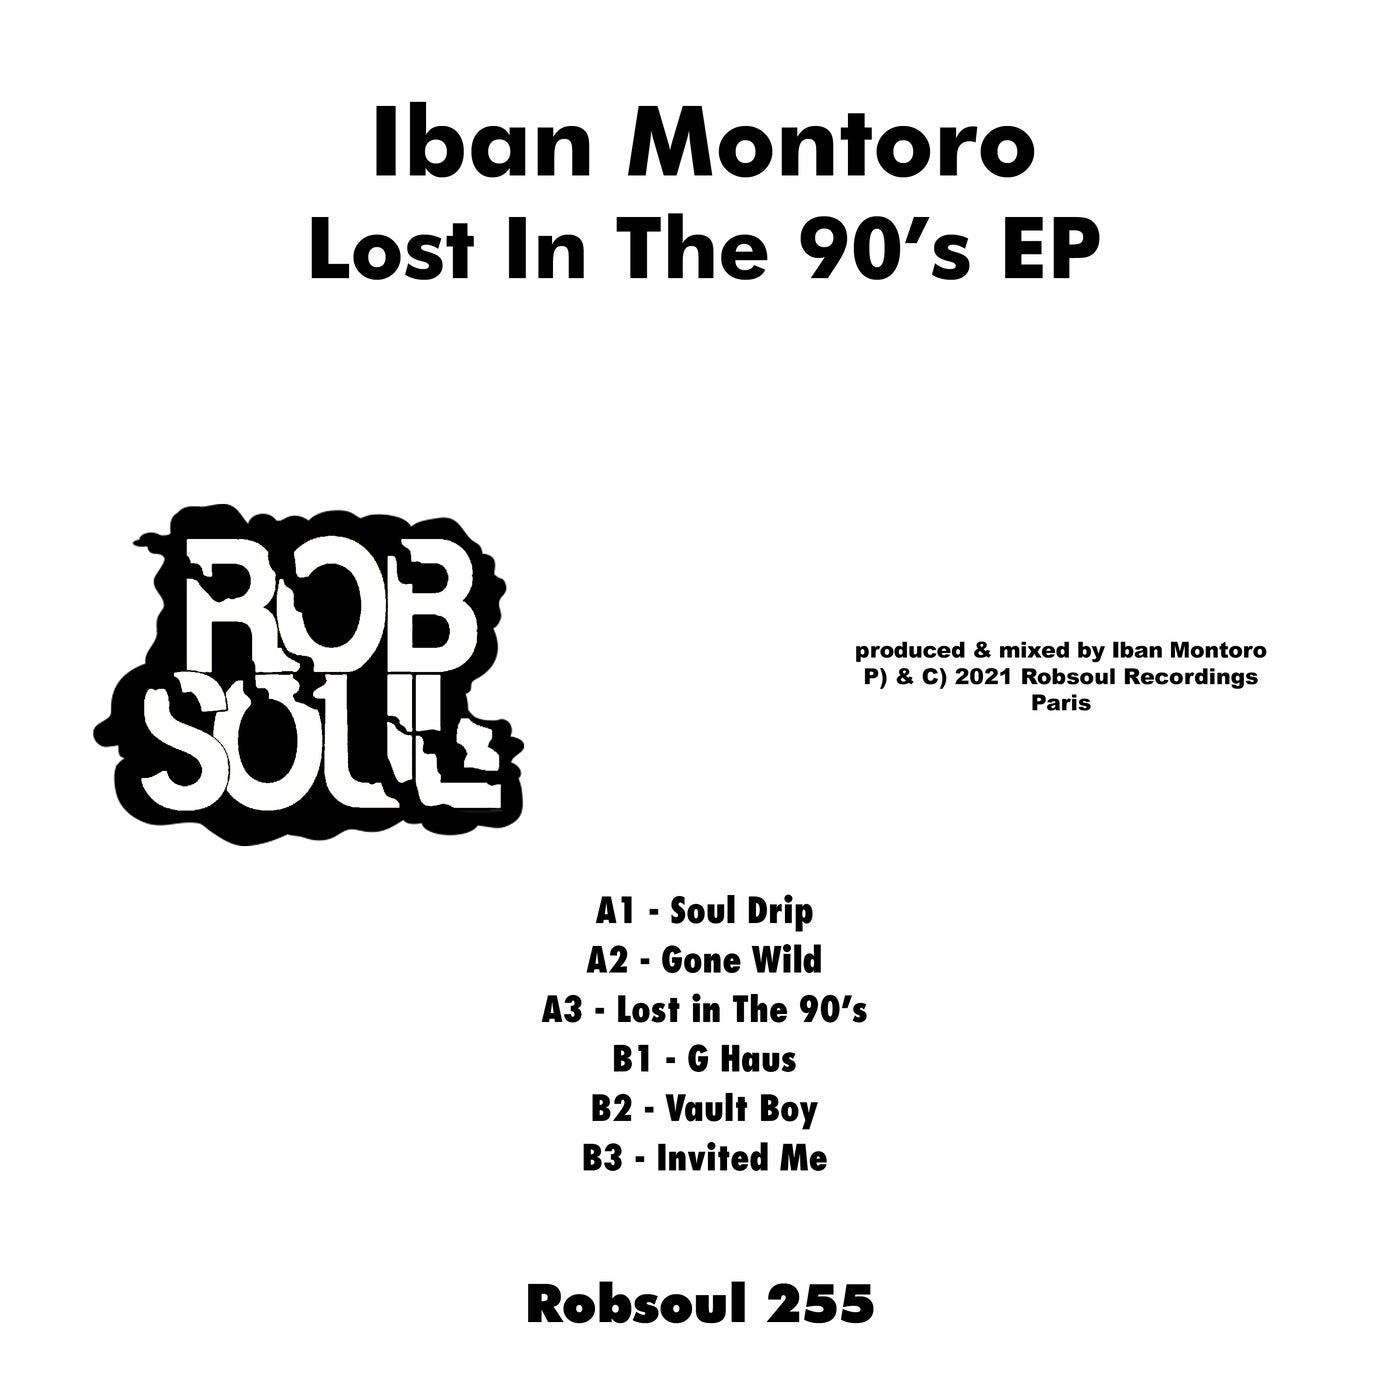 Lost In The 90's EP